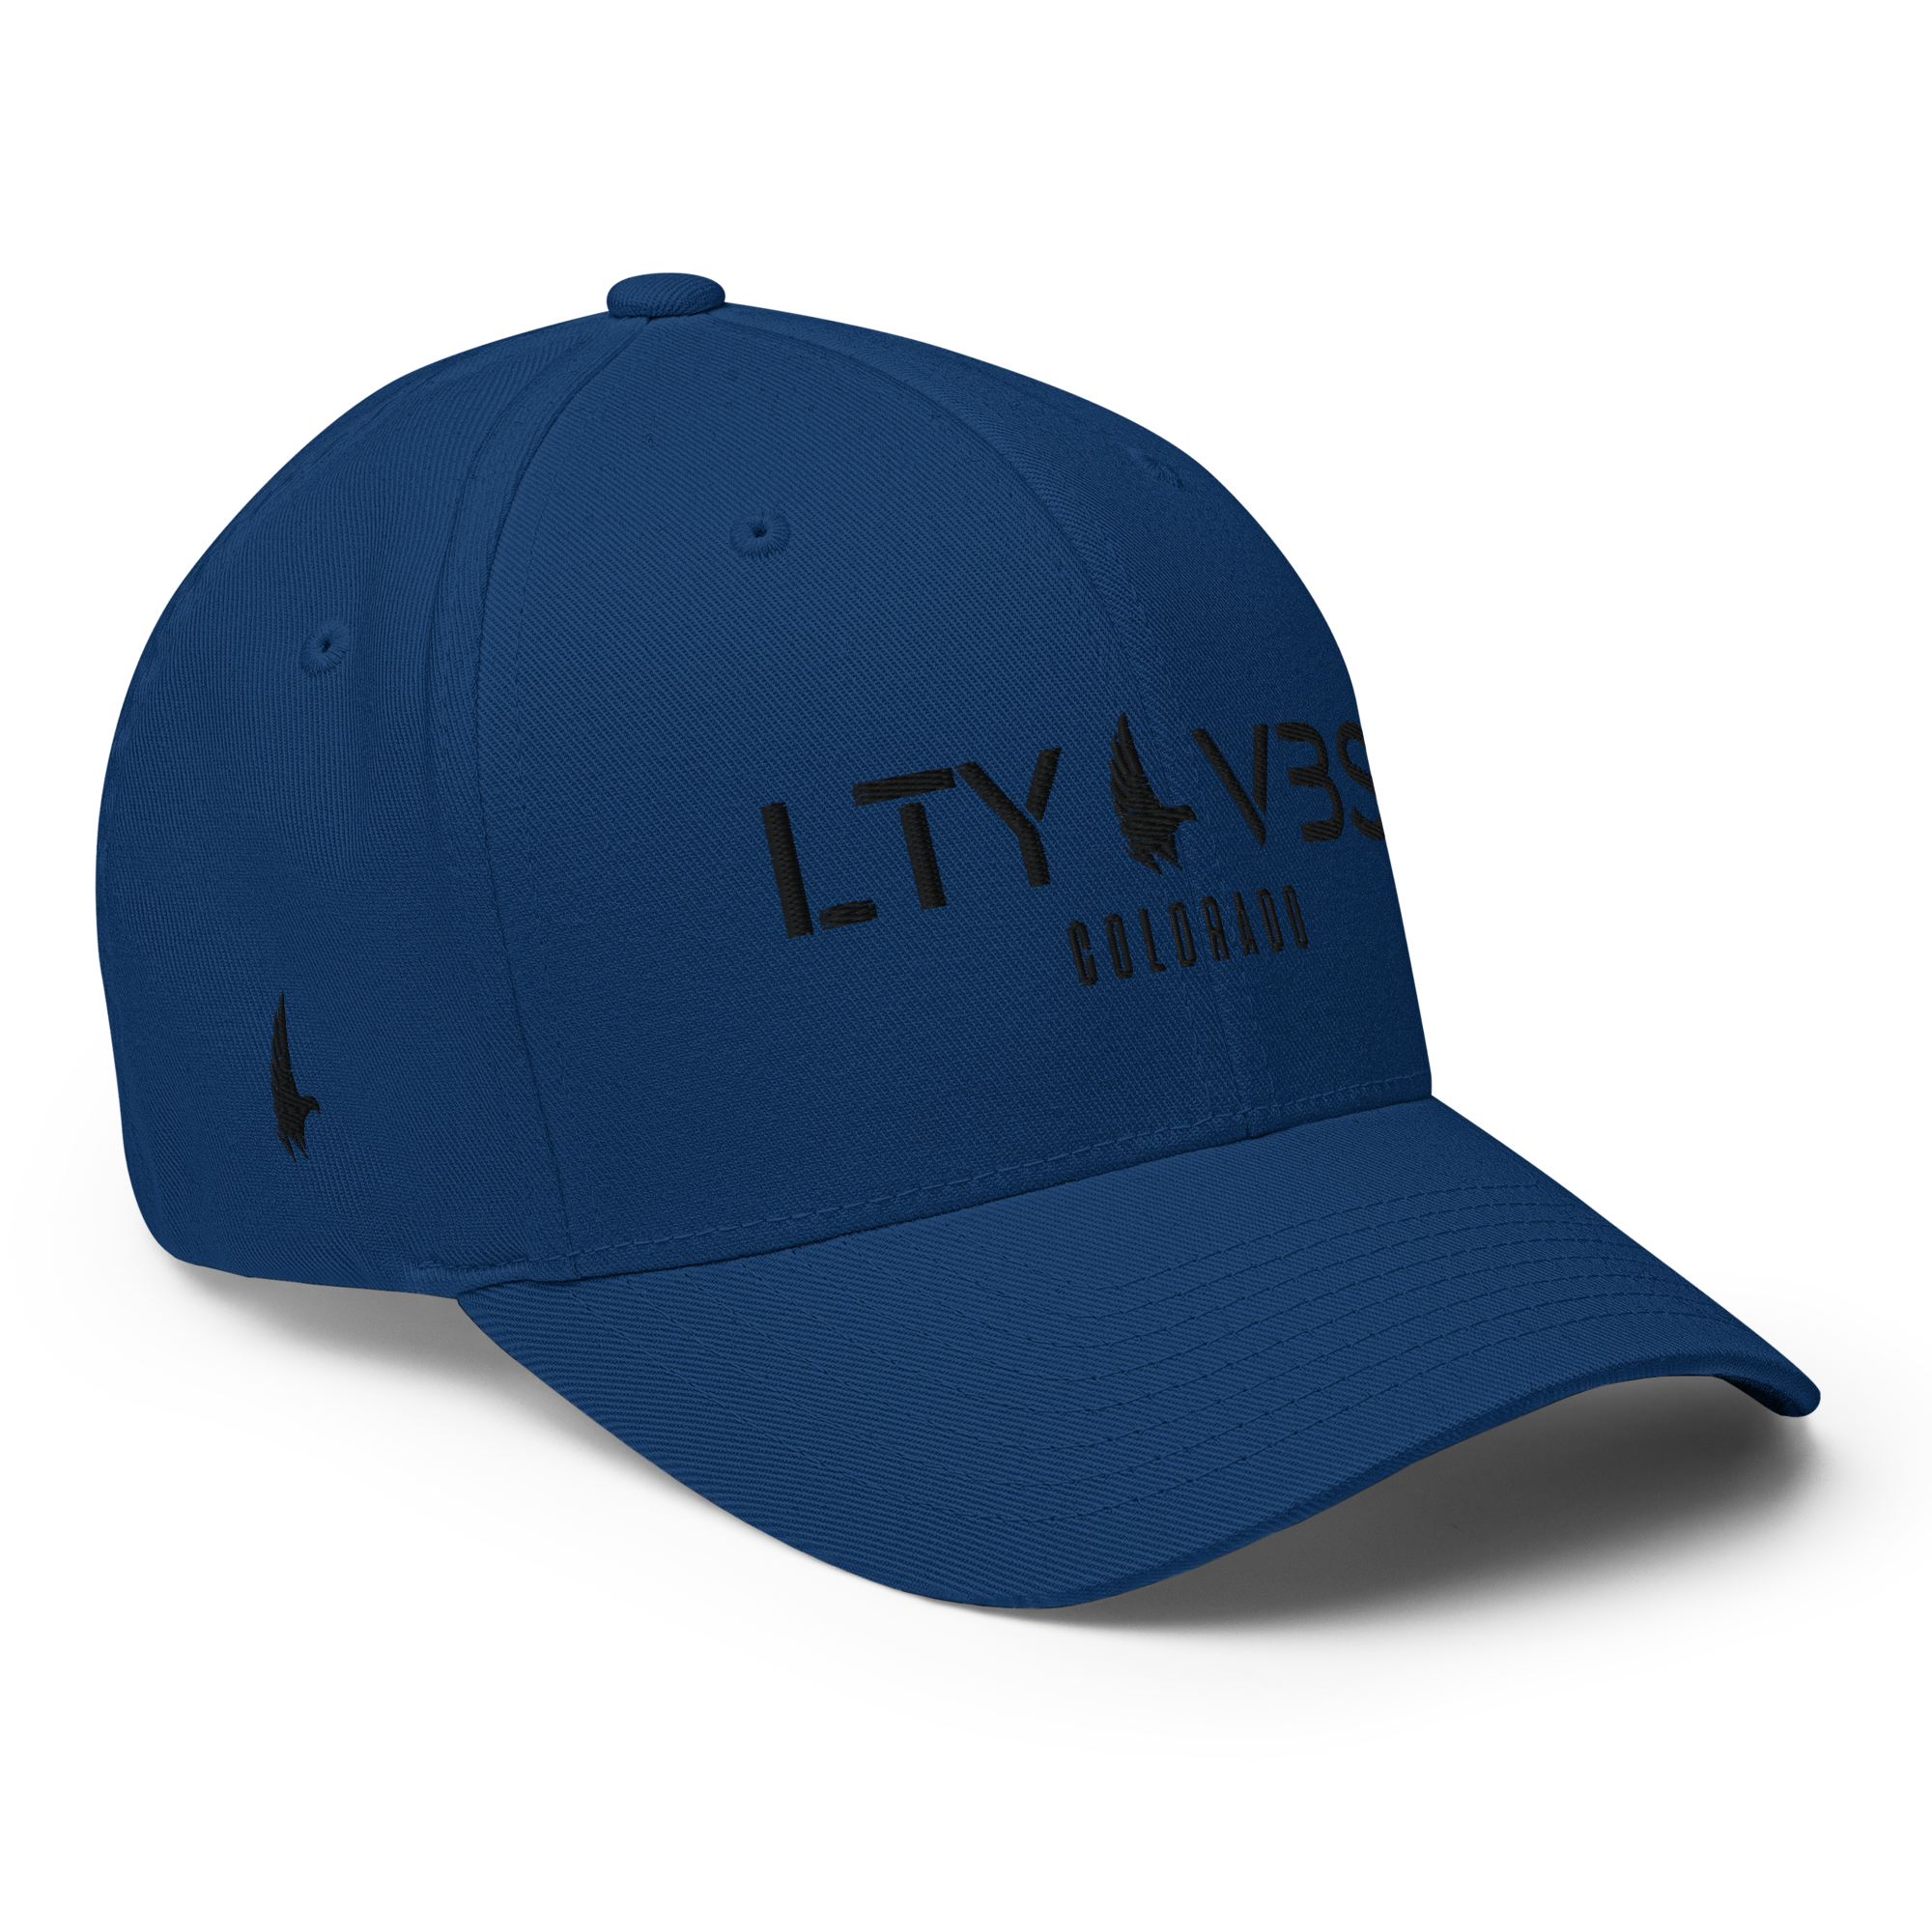 Loyalty Era Colorado Fitted Hat Blue / Black Fitted - Loyalty Vibes